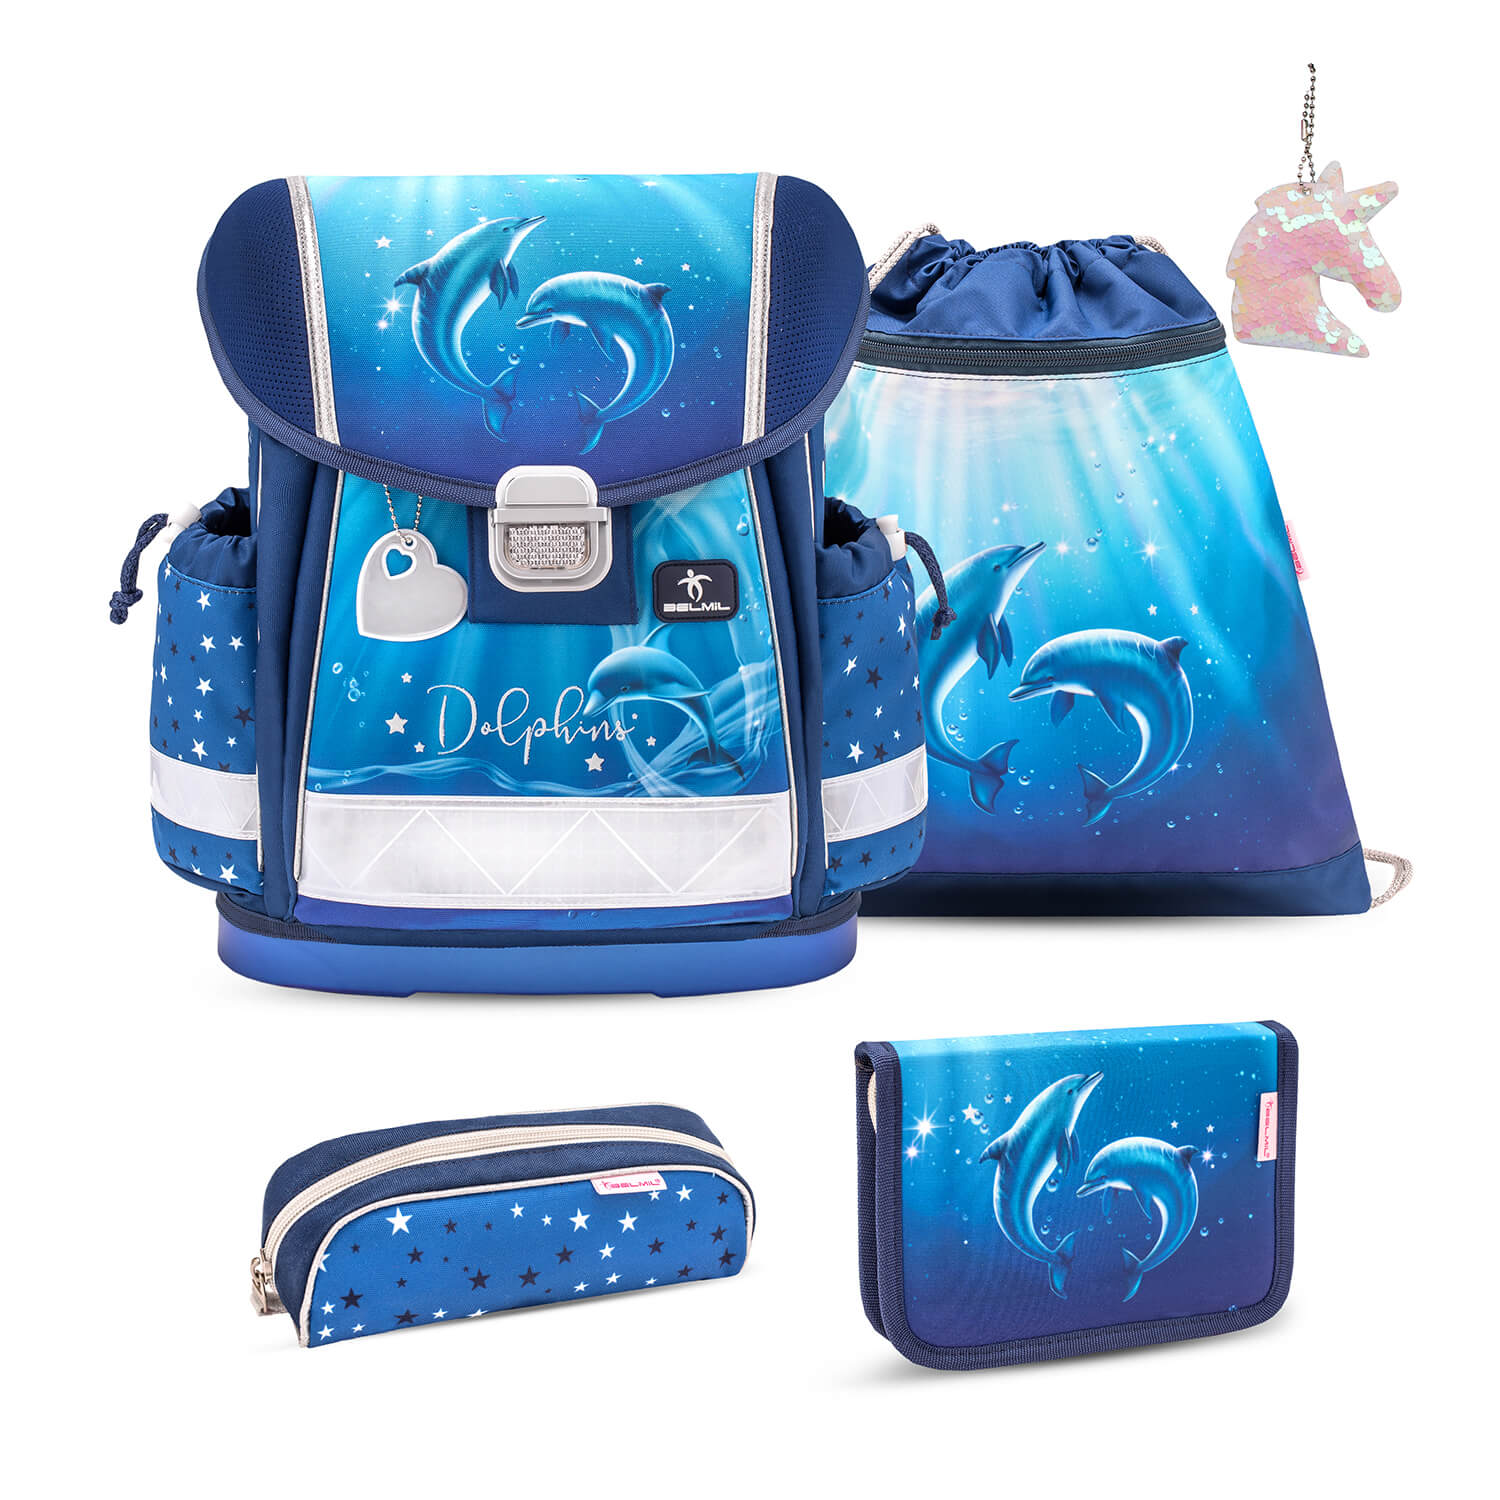 Classy Dolphins schoolbag set 5 pcs with GRATIS keychain